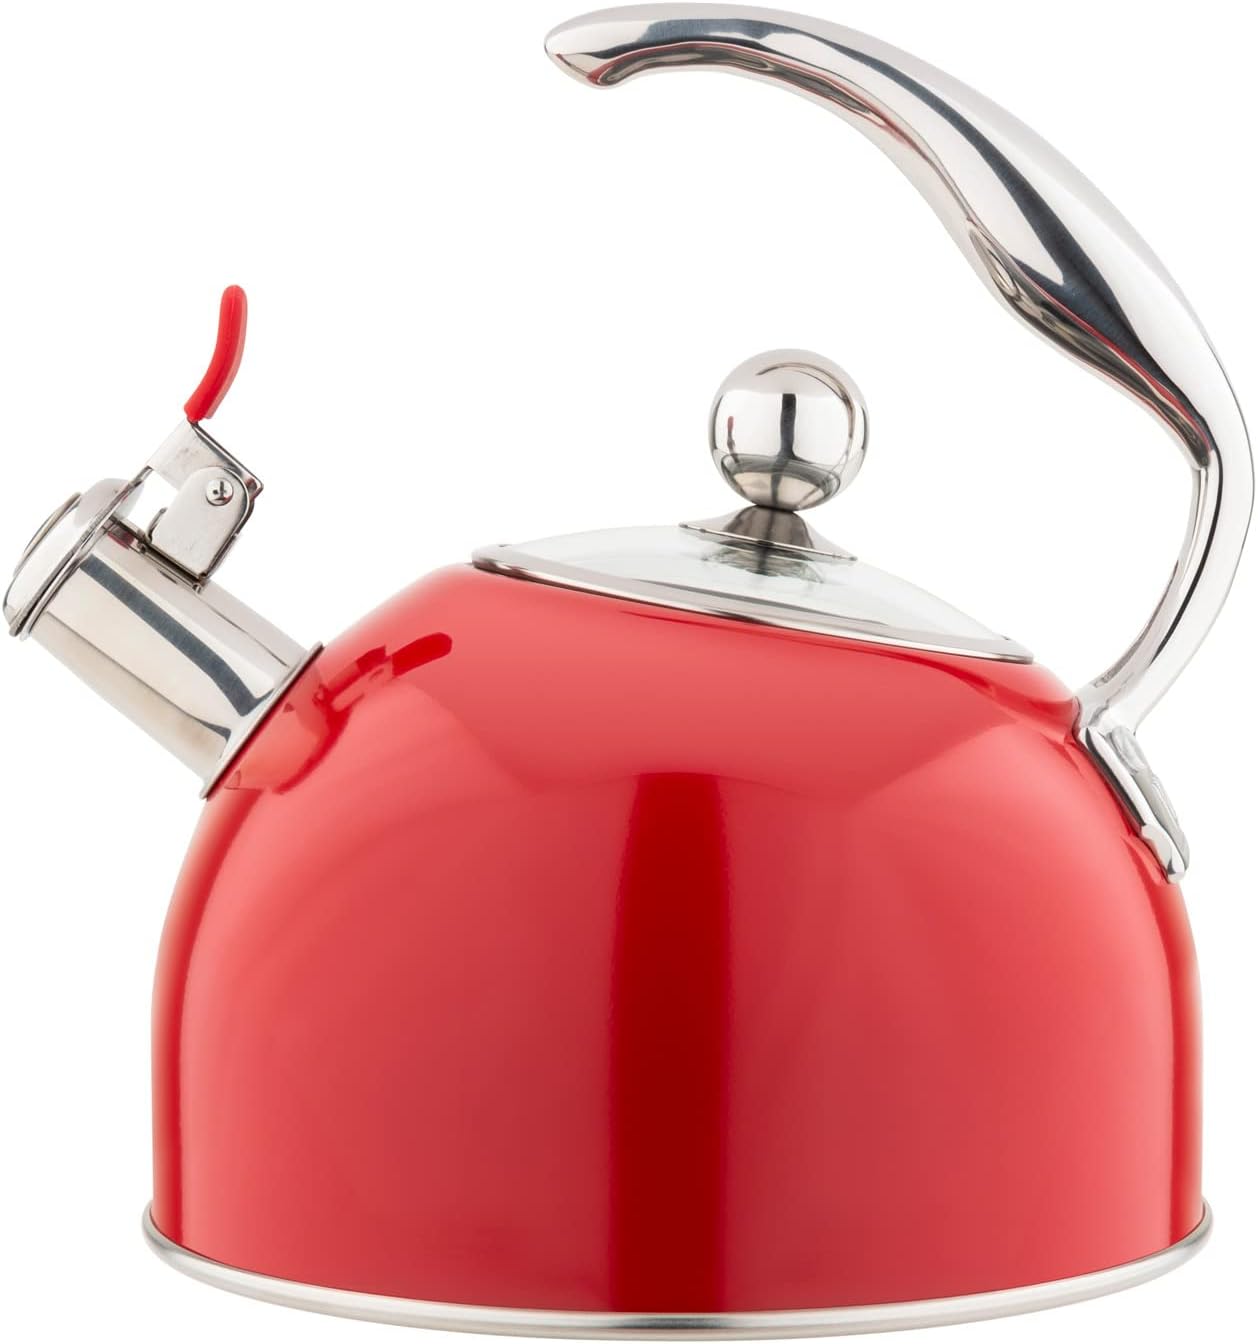 This is a great kettle. I know because I literally tried ten different kettles before I found this one. It shouldn't be hard to find a kettle that doesn't suck, but it is. This one is not perfect, but it' close. It satisfies my five basic requirements: - Red - Whistle - Handle is not awkward to hold - Whistle toggles on and off - Inside won't rustIt has some nice features. The whistle sounds good. It' not terribly loud, which could be good or bad depending on your use case. It has a little sil